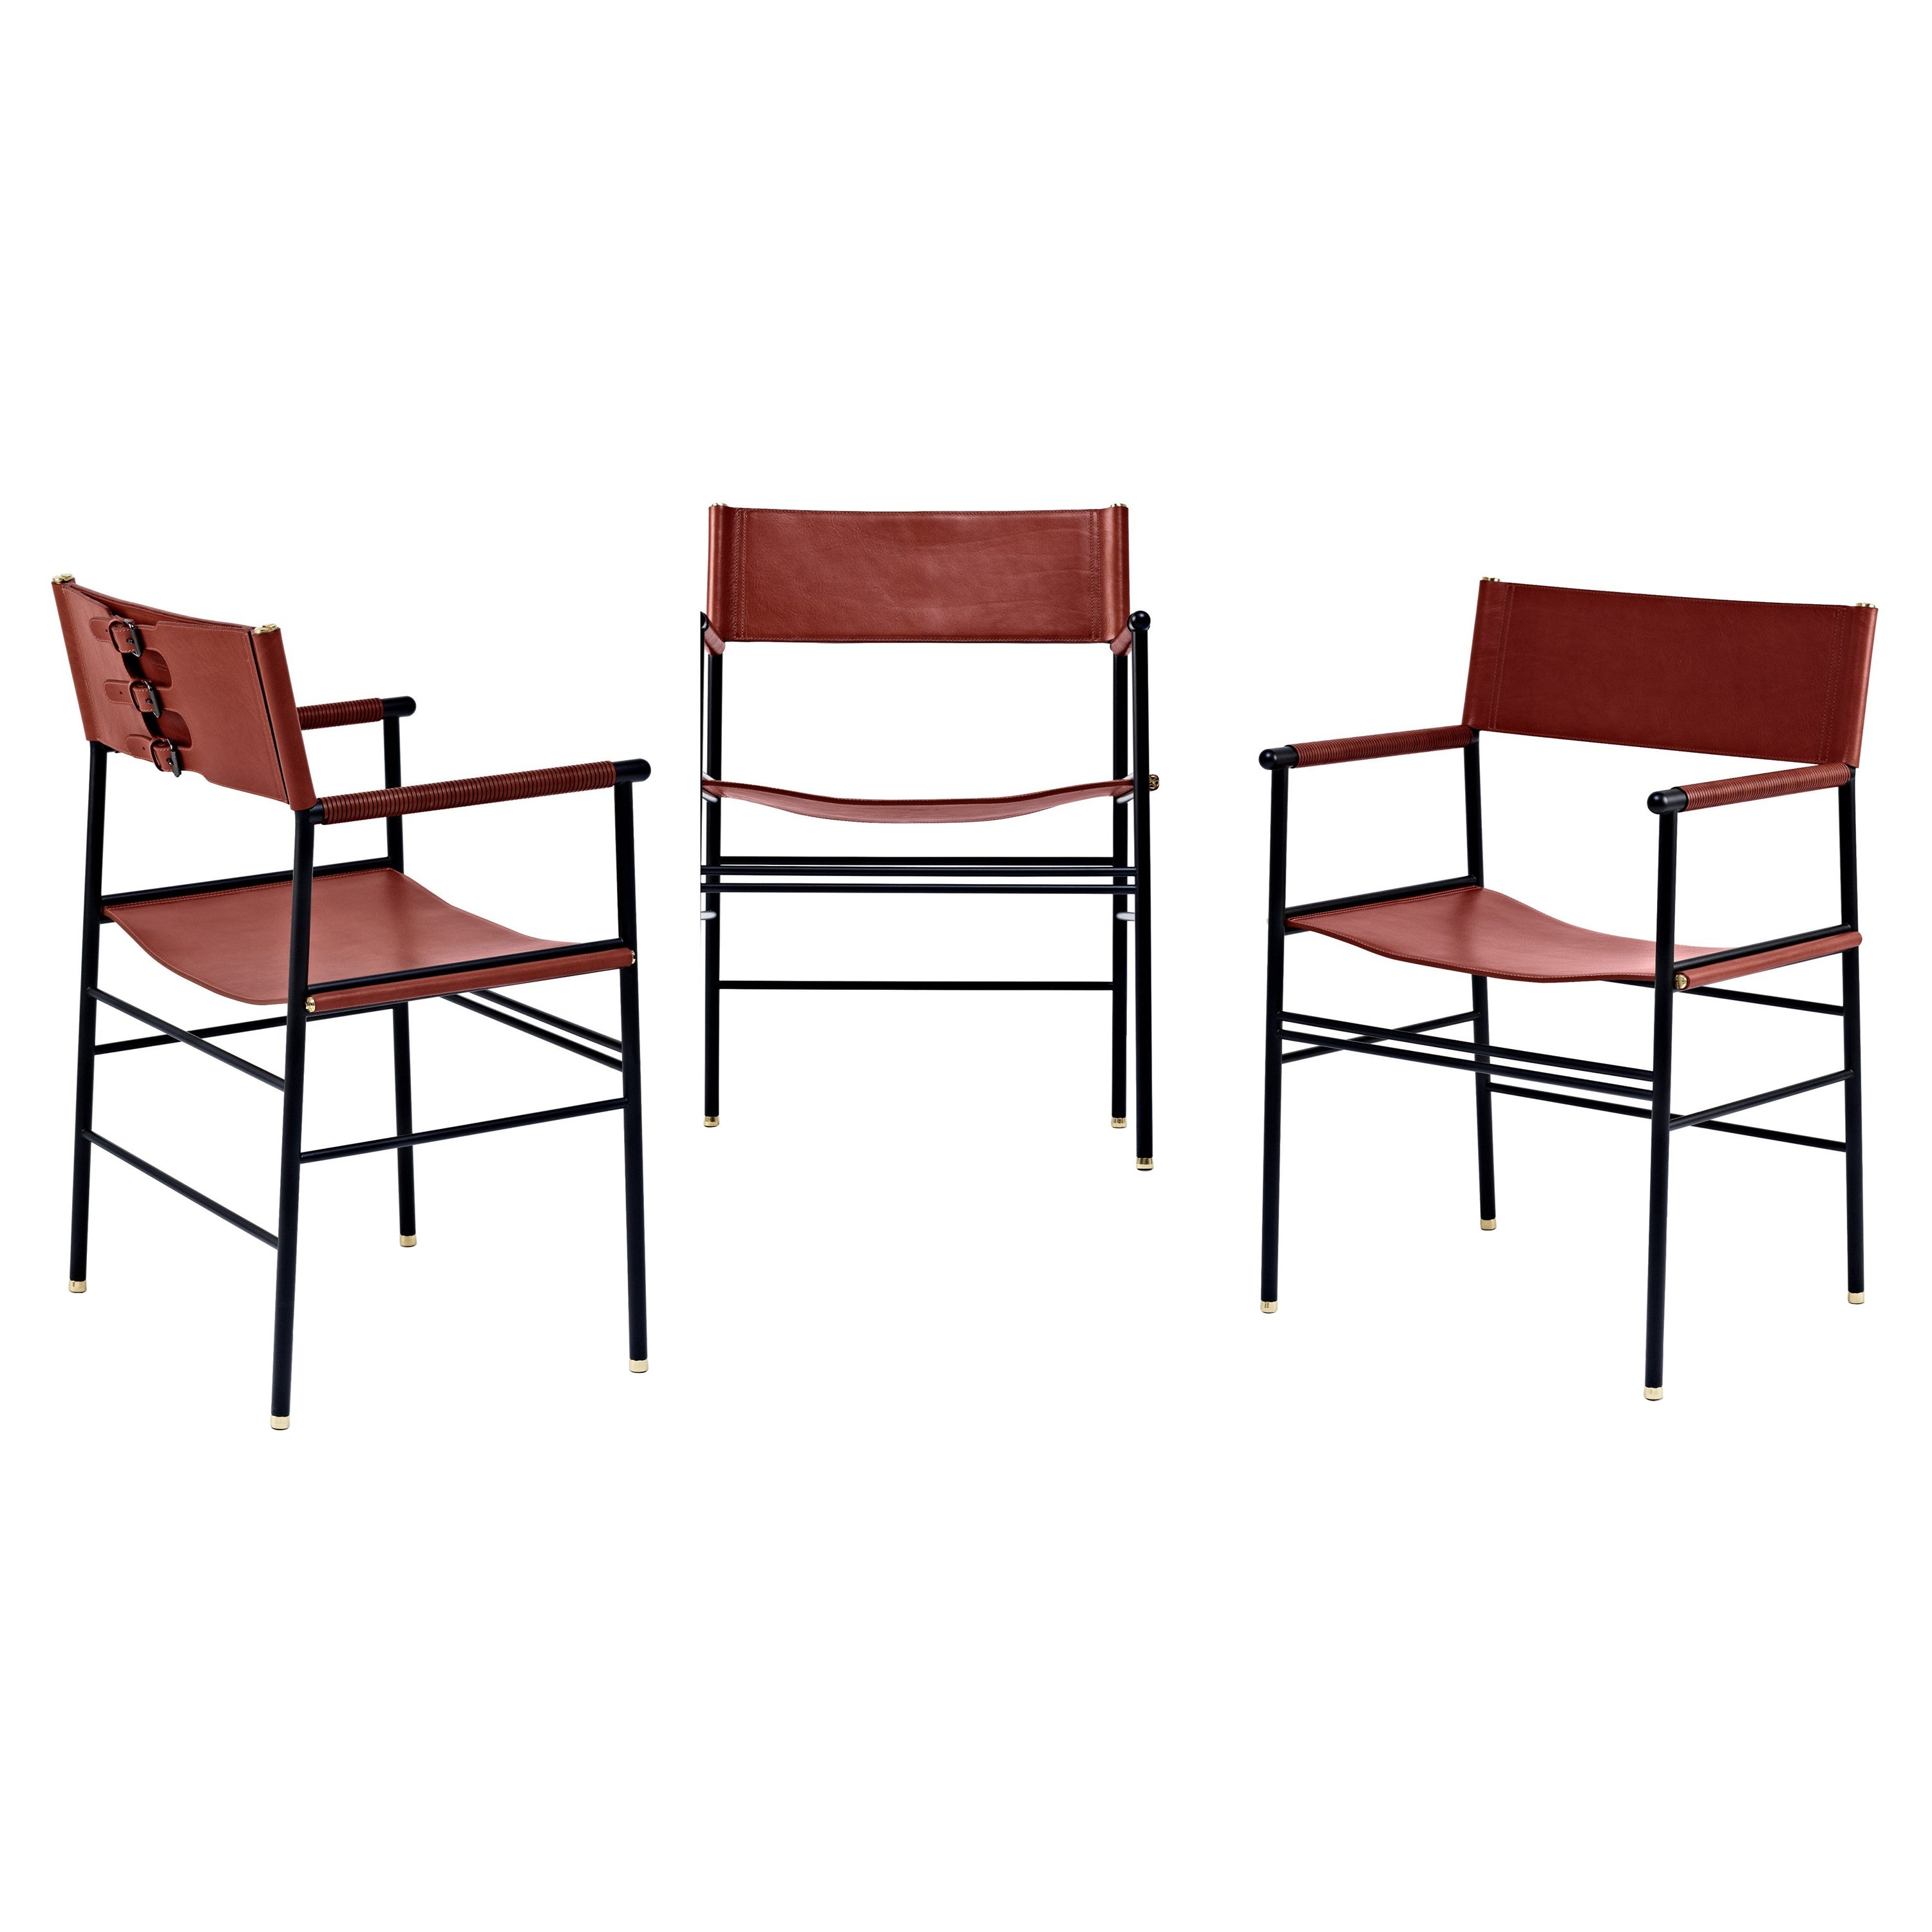 Set of 3 Handcraft Contemporary Armchair Cognac Leather & Black Rubbered Metal For Sale